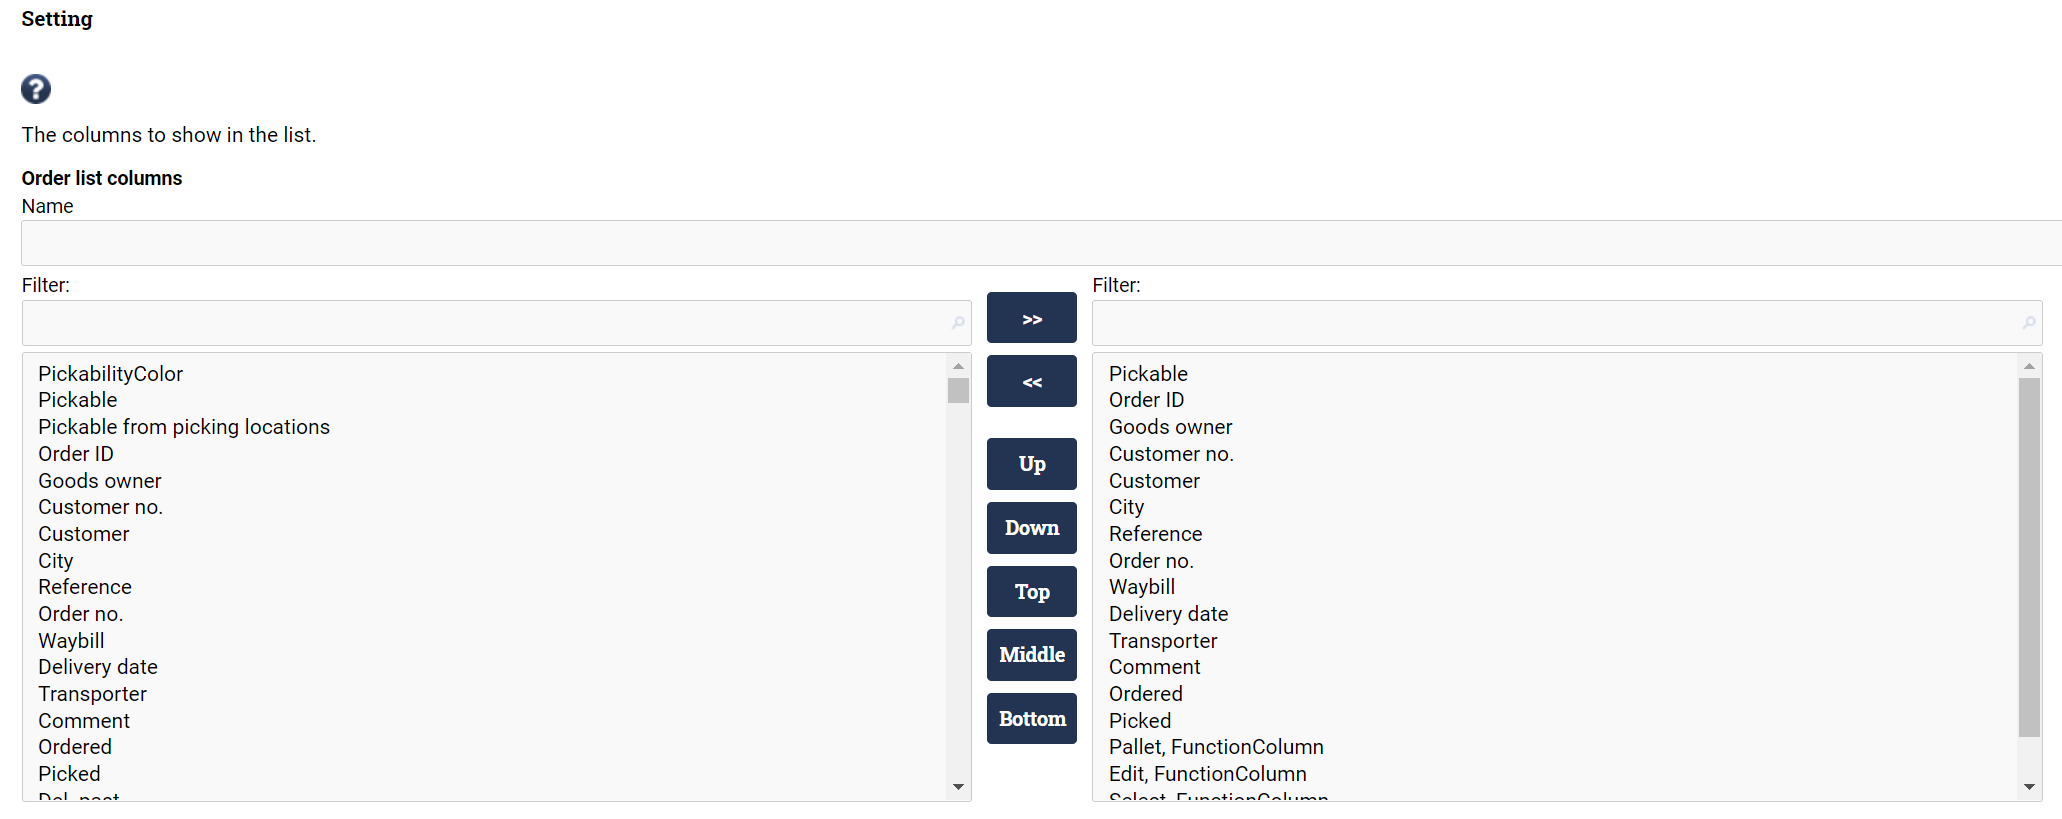 The column settings page in Ongoing WMS.